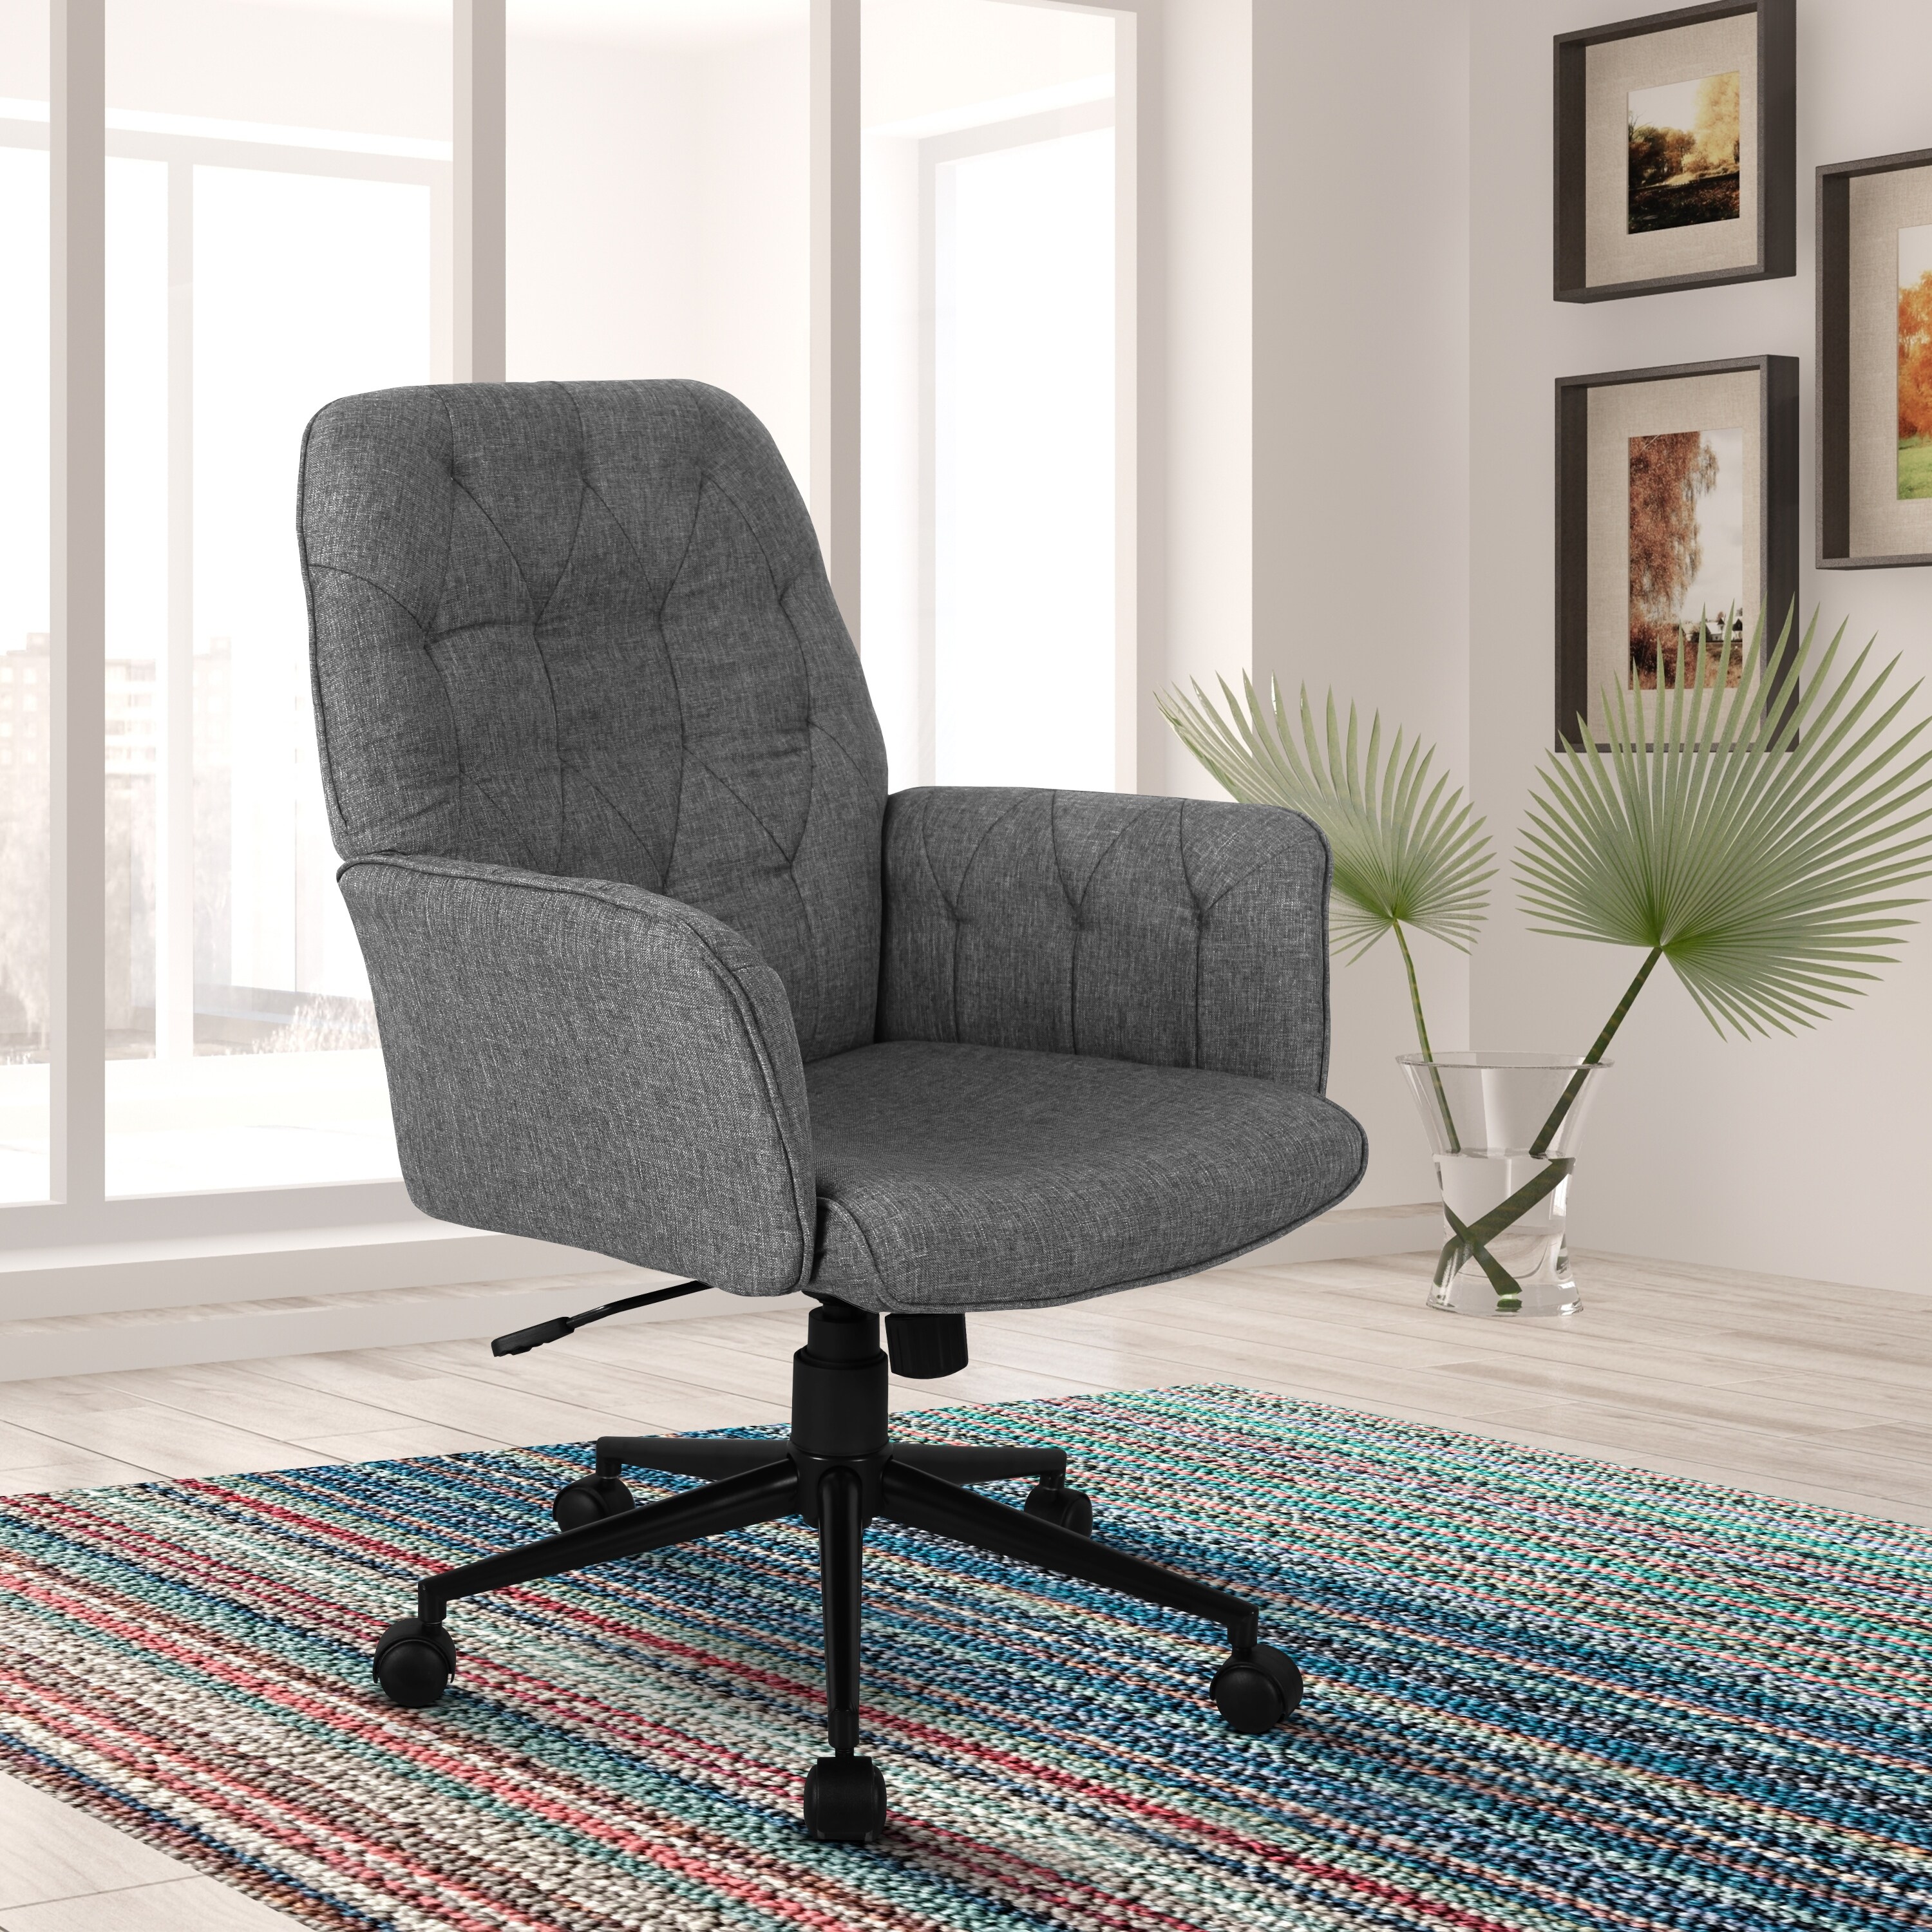 https://ak1.ostkcdn.com/images/products/is/images/direct/780ff46b6f240ad181976ef73bede7ec3485481d/Techni-Mobili-Modern-Upholstered-Tufted-Office-Chair-with-Arms.jpg